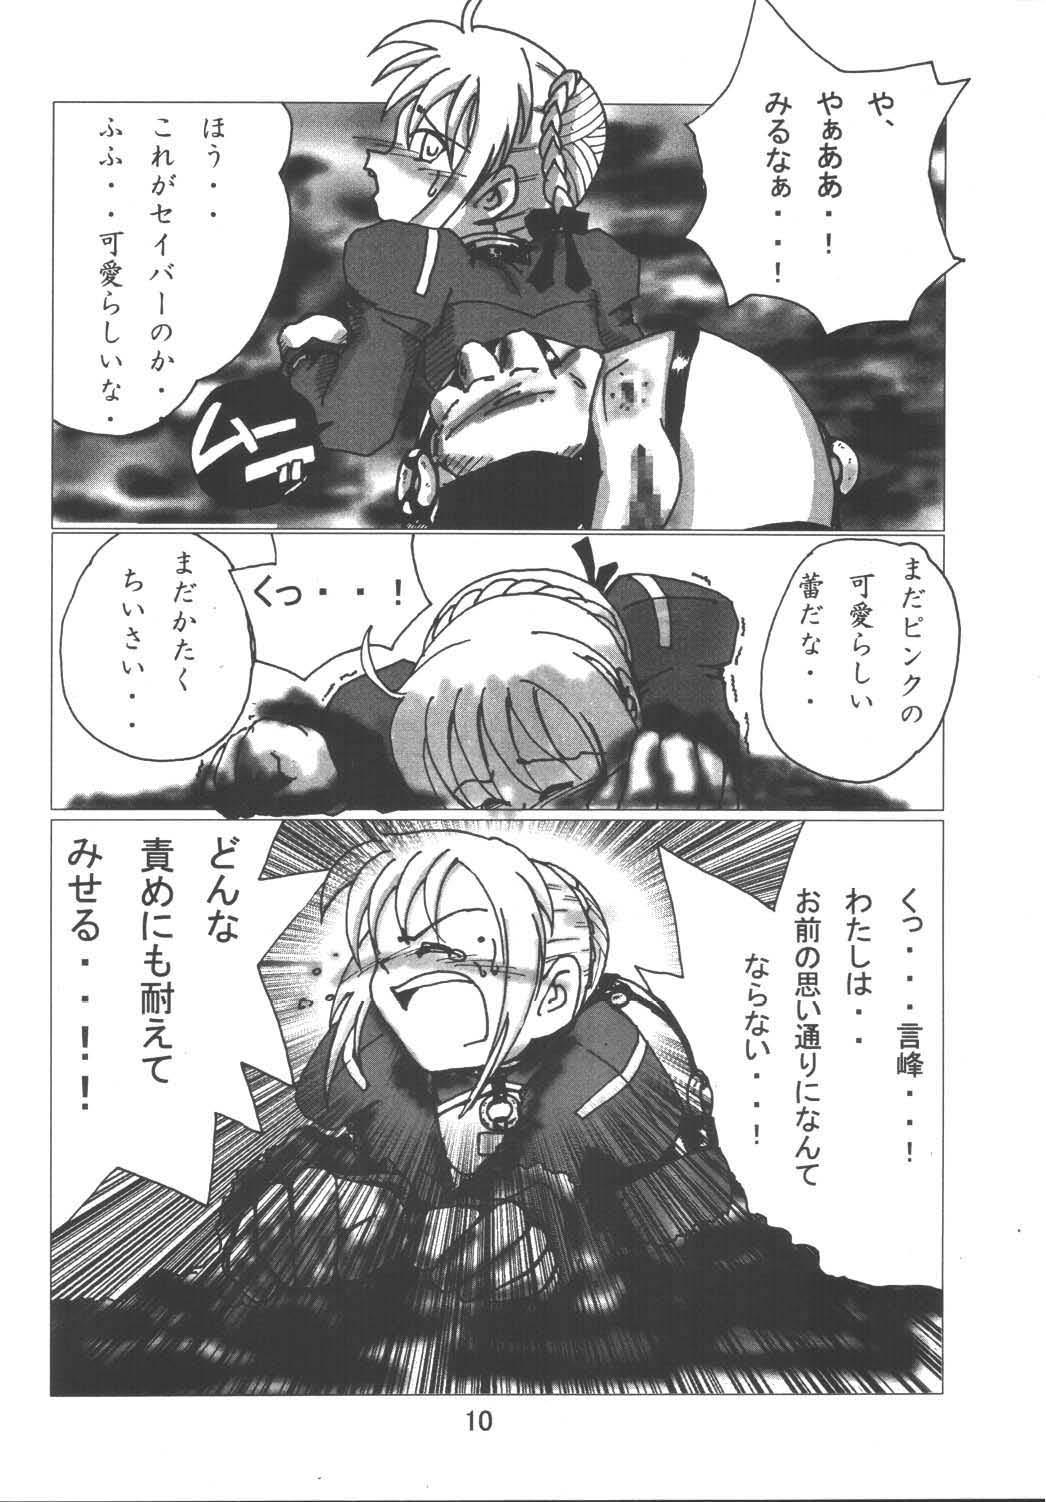 Stud Fate Nightmare For Saber - Fate stay night Gay Bus - Page 10